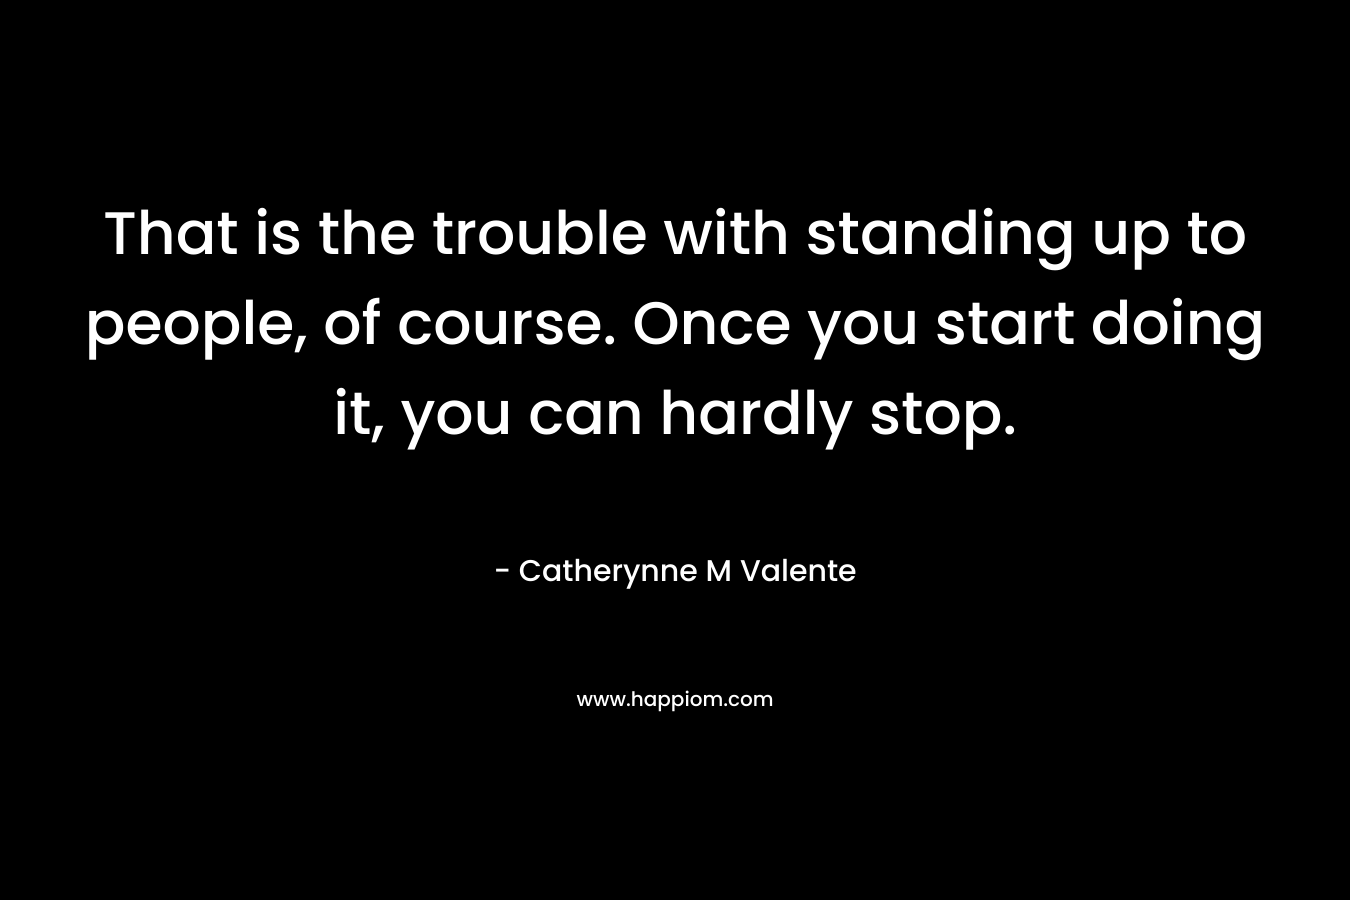 That is the trouble with standing up to people, of course. Once you start doing it, you can hardly stop. – Catherynne M Valente